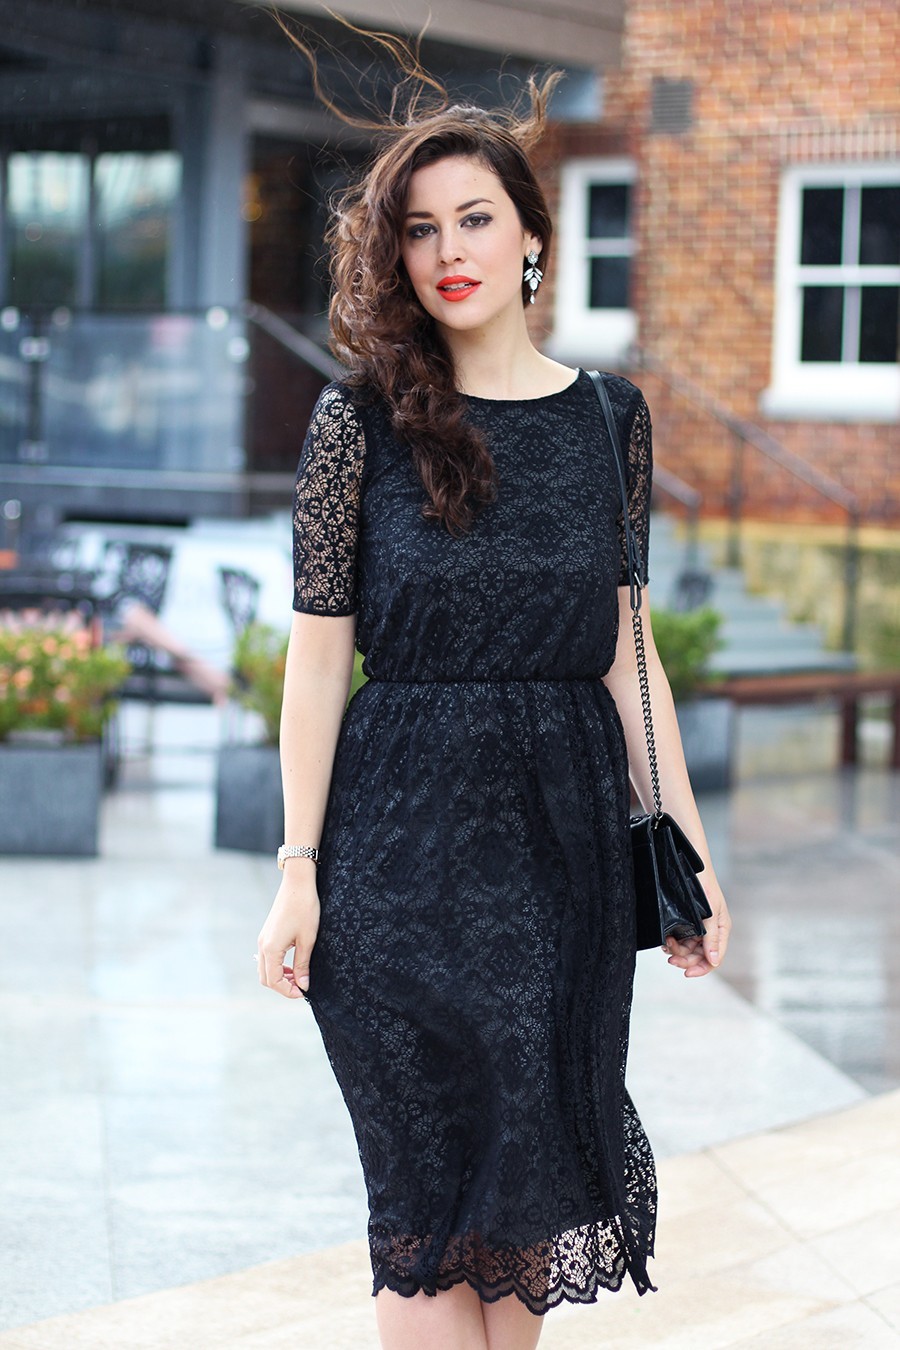 Black Lace Dresses, Black Lace Dresses with Sleeves